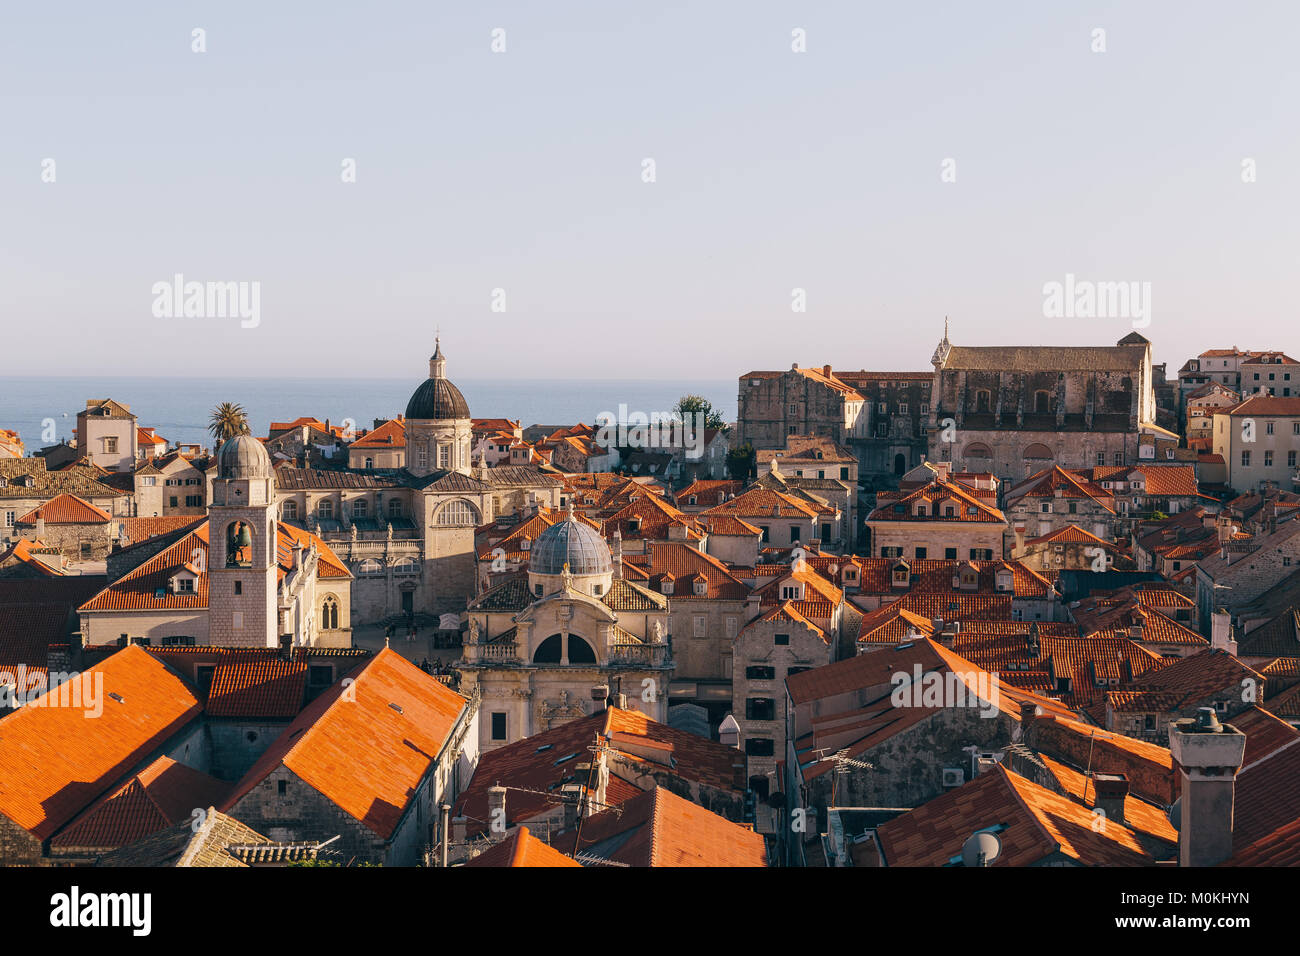 Panoramic view of the historic town of Dubrovnik, one of the most famous tourist destinations in the Mediterranean Sea, at sunset, Dalmatia, Croatia Stock Photo